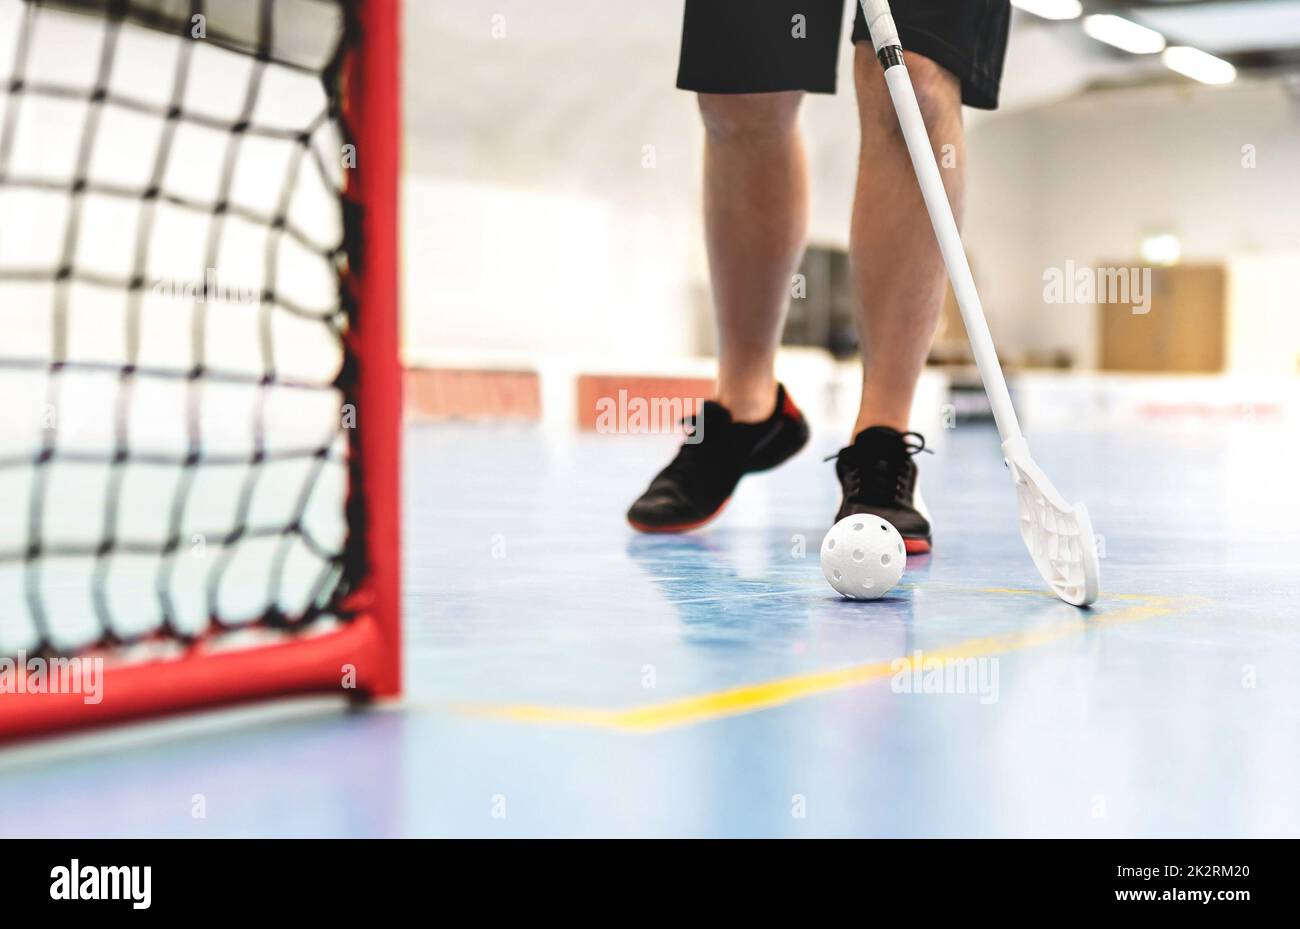 Floorball player. Floor hockey and indoor bandy game. White ball and stick. Goal and net on the floor in training arena. Young man or boy playing. Stock Photo